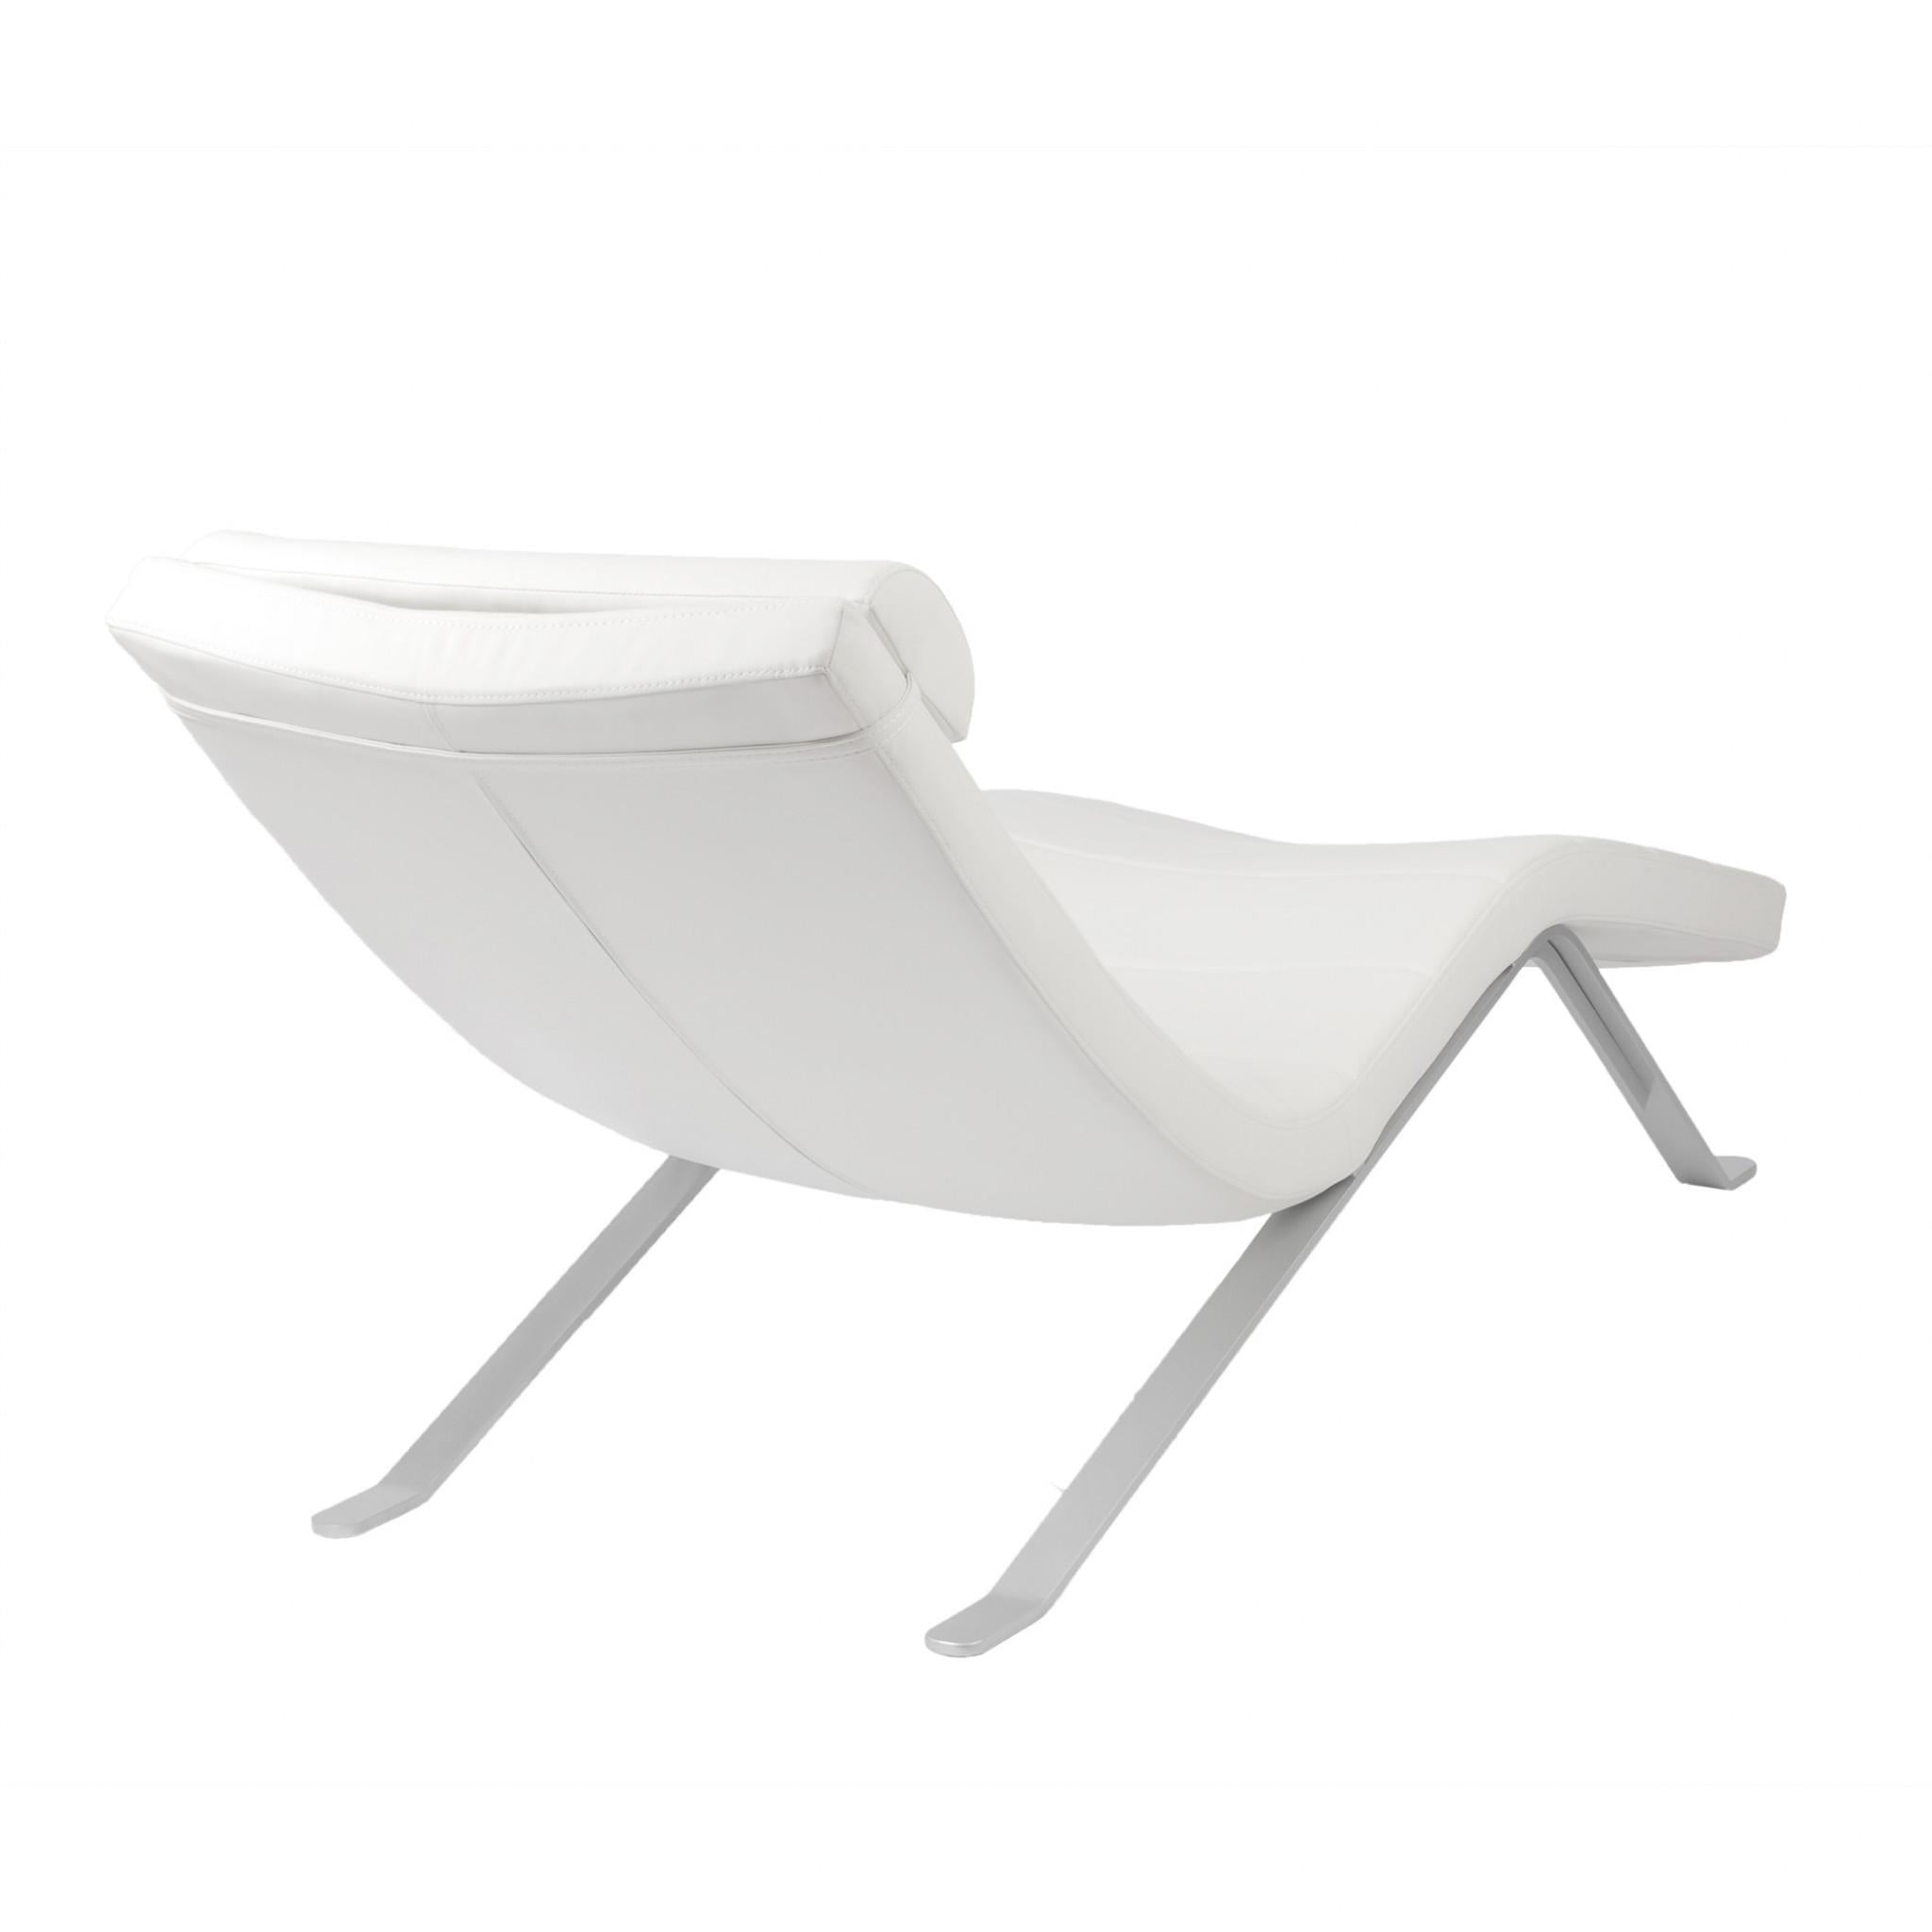 White Faux Leather and Chrome Wavy Chaise Lounge Chair